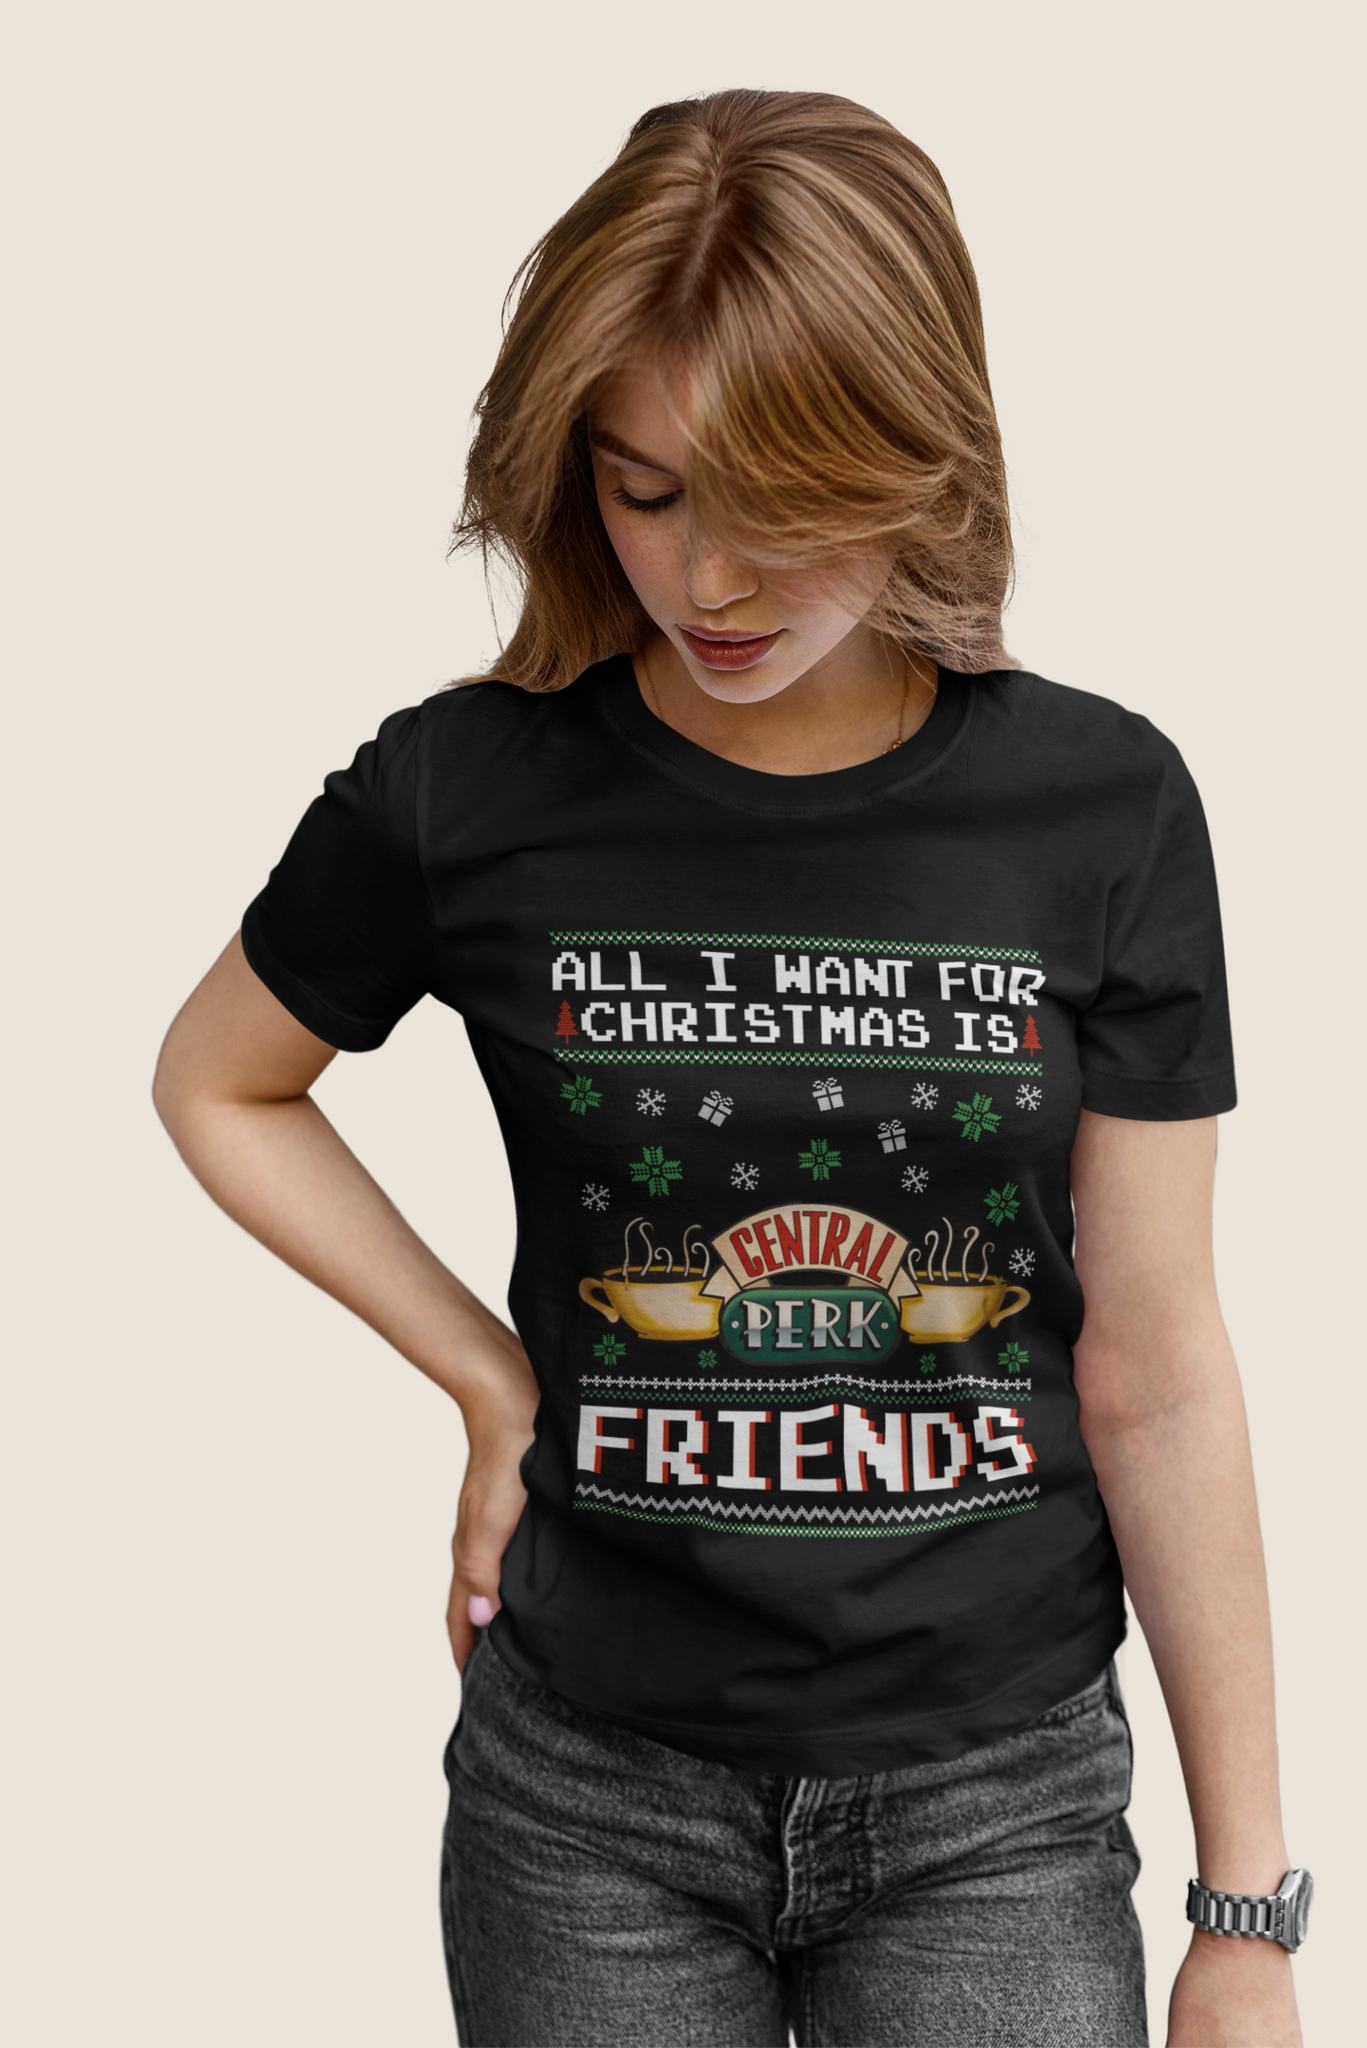 Friends TV Show Ugly Sweater Shirt, Friends Shirt, Coffee Central Perk T Shirt, All I Want For Christmas Is Friends Tshirt, Christmas Gifts